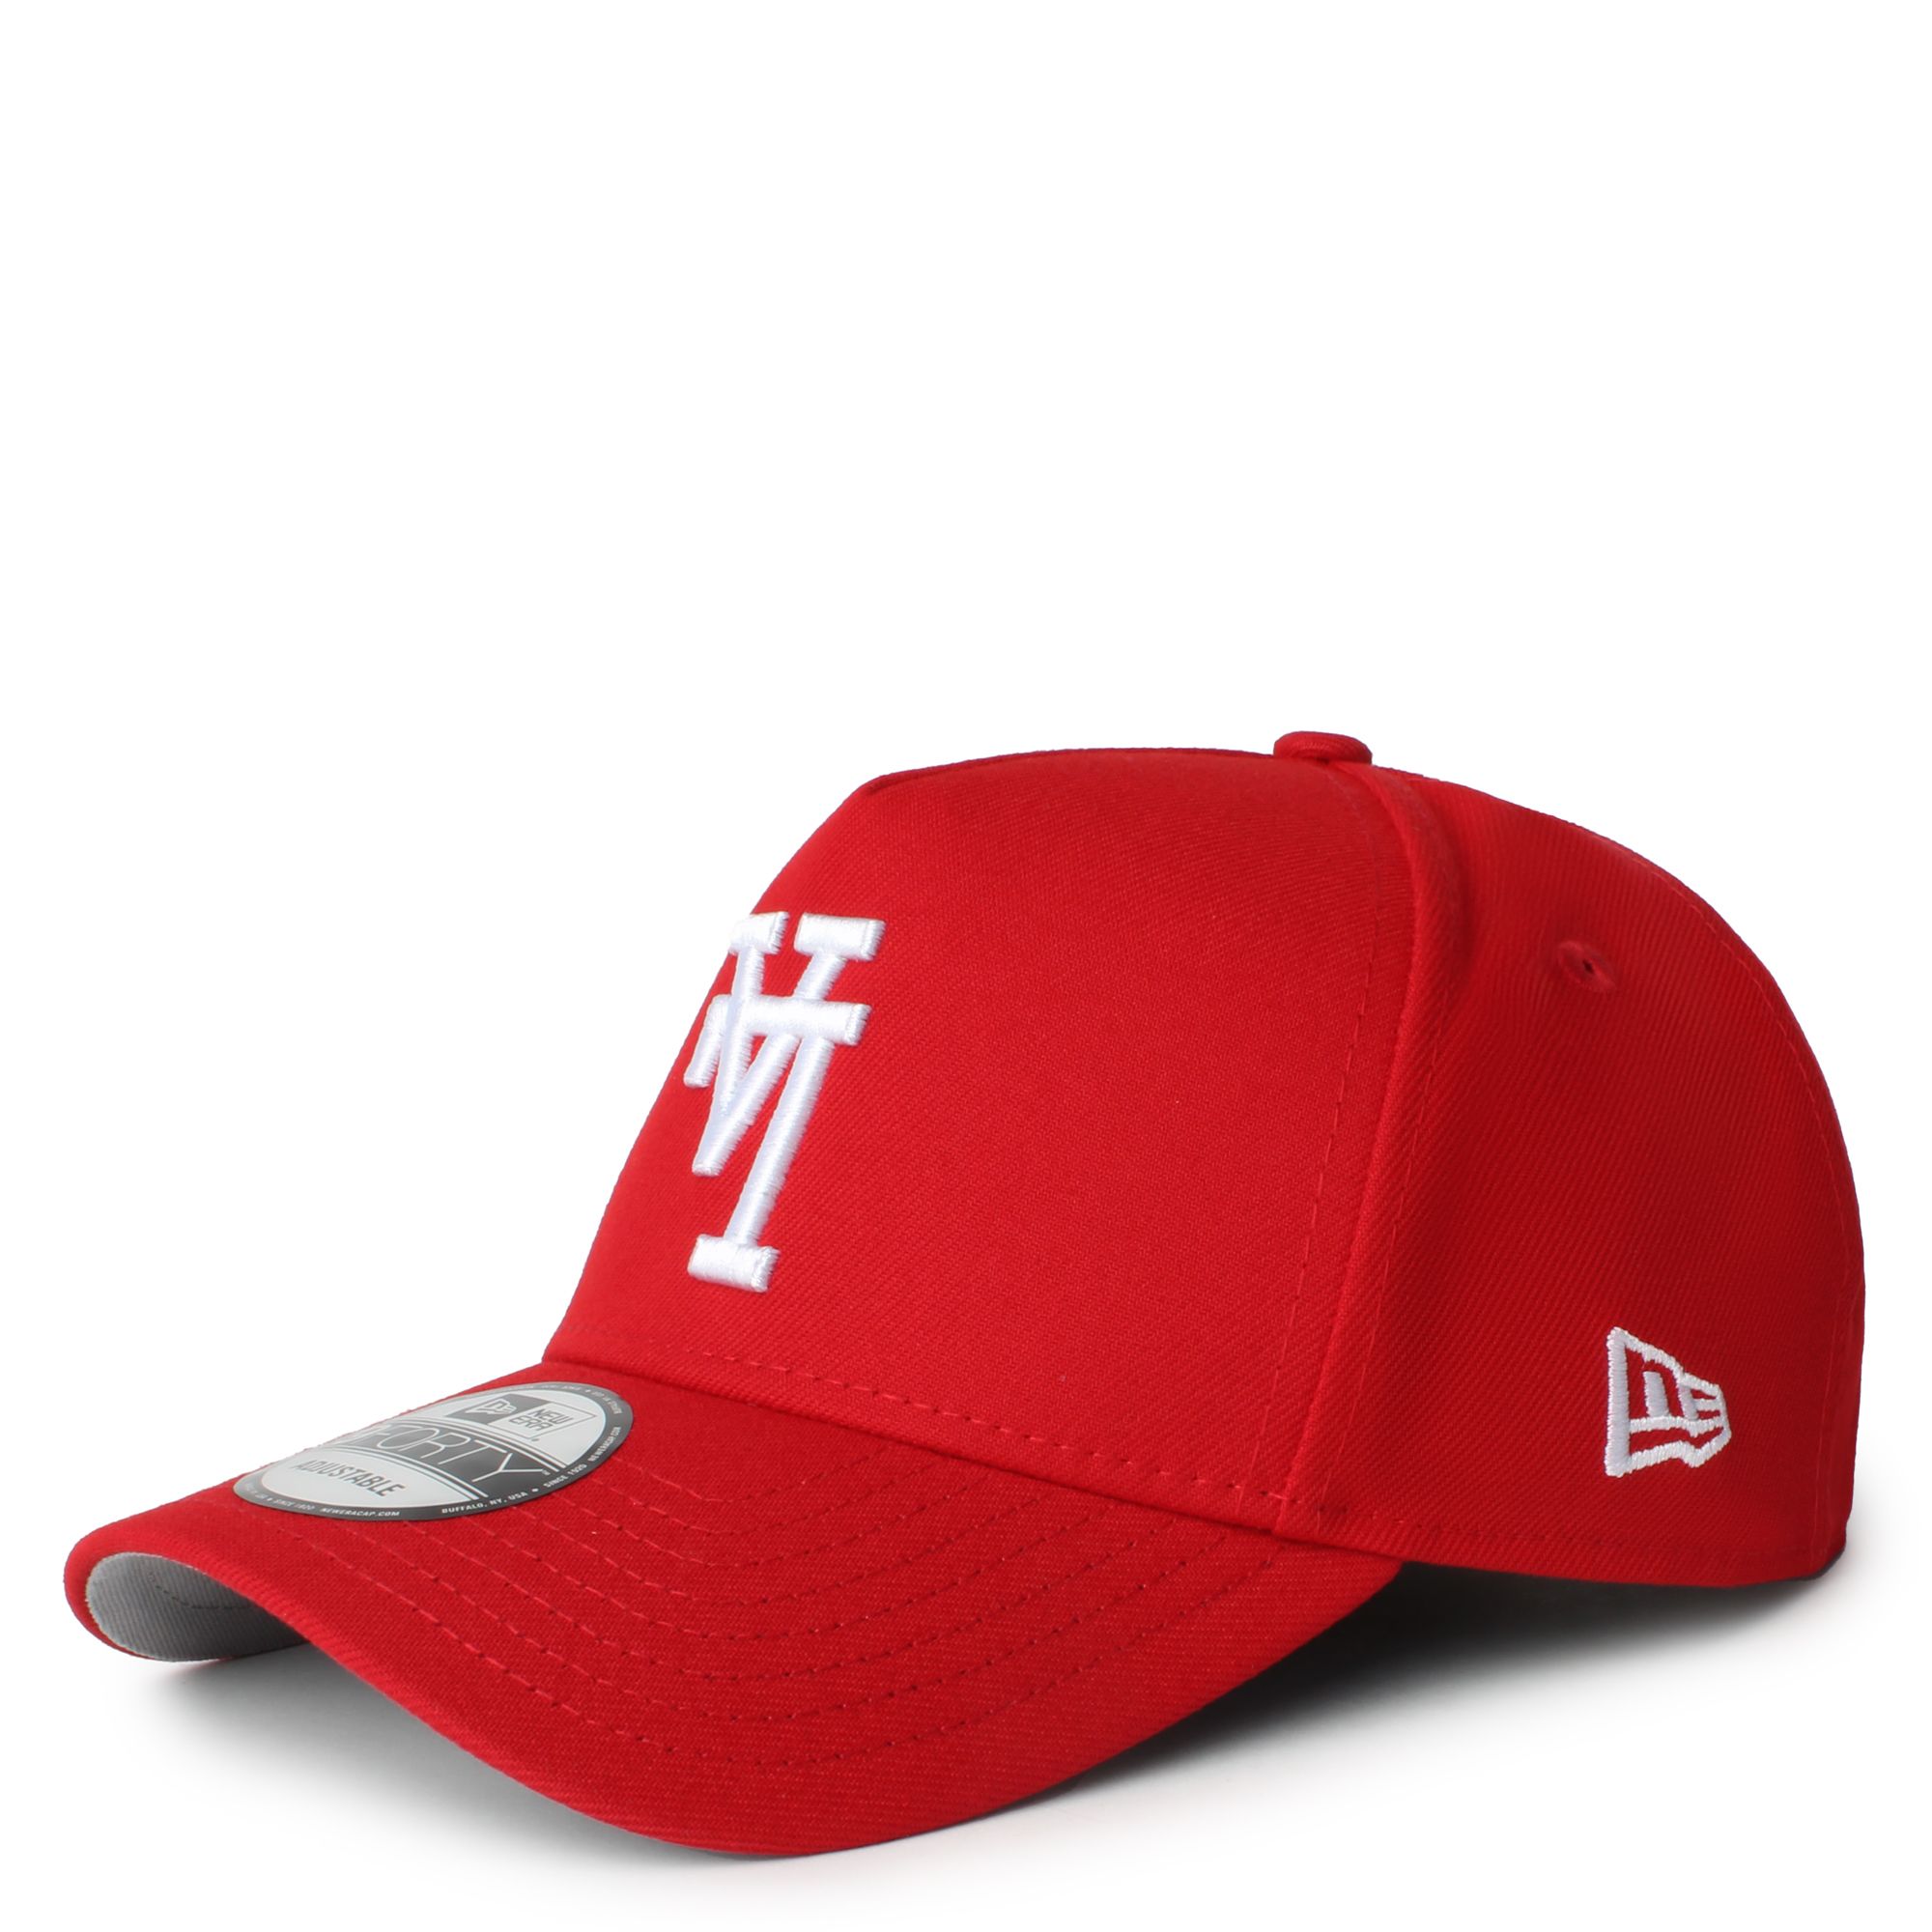 New Era Caps Los Angeles Dodgers 9FORTY Snapback Red